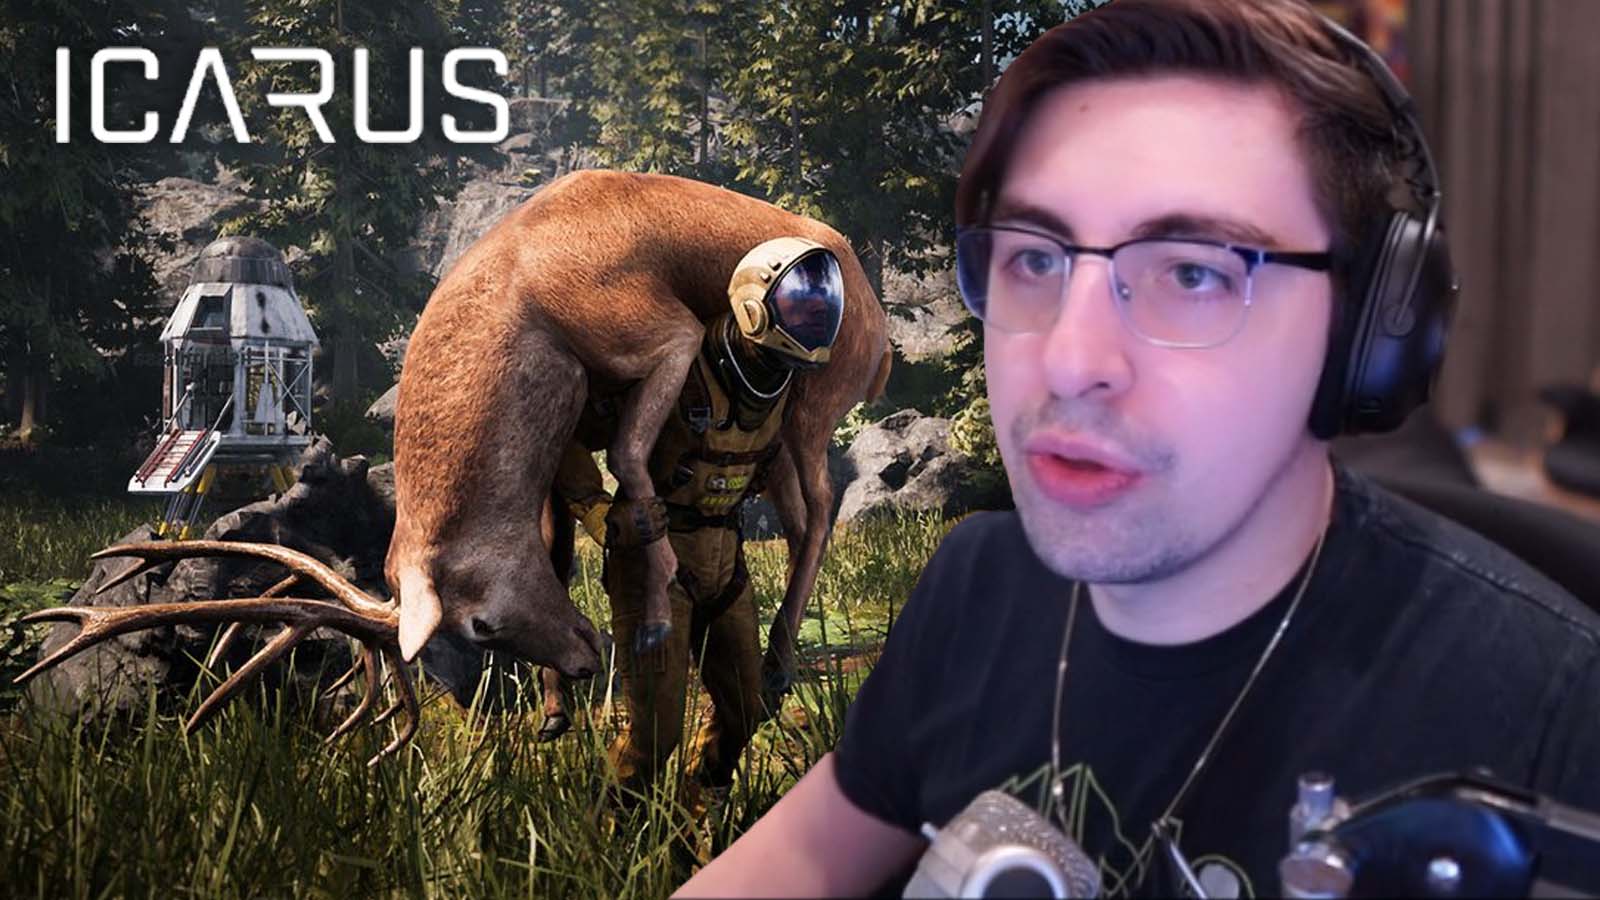 Shroud claims upcoming ICARUS game will be "one of the greatest survival games ever"